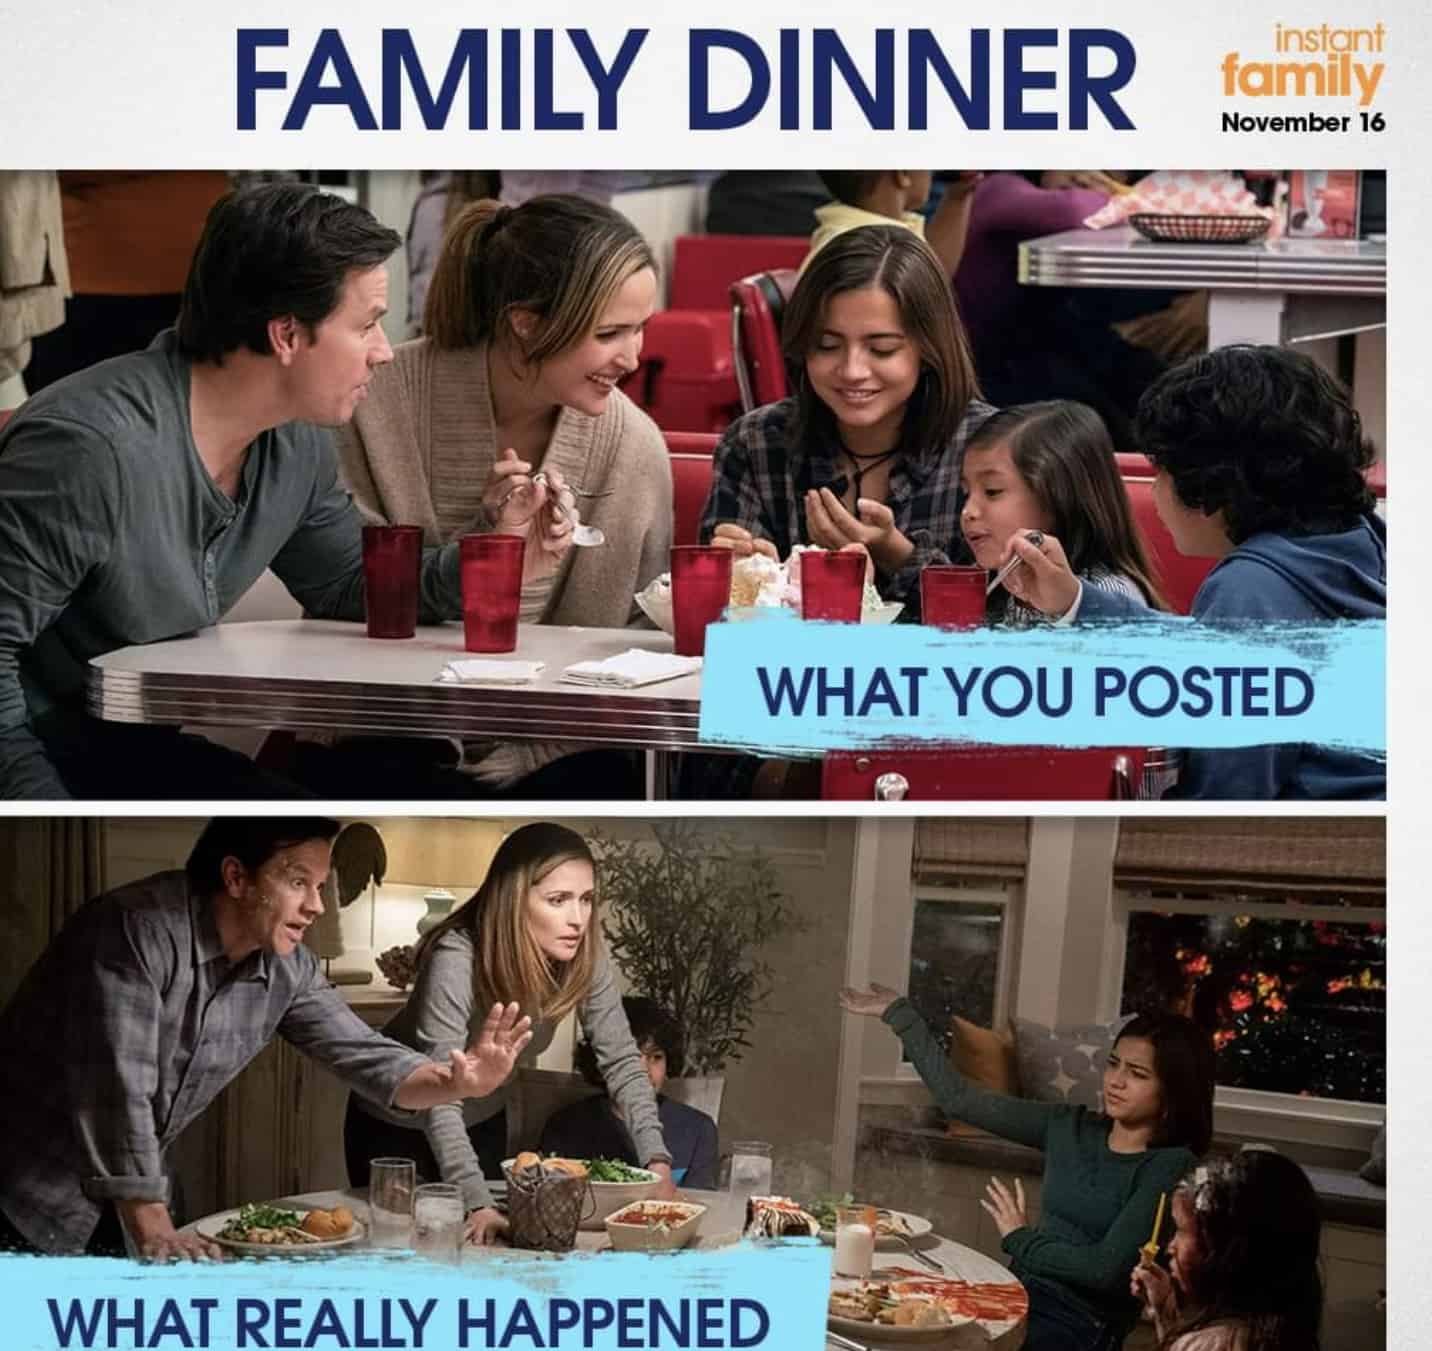 SHOULD YOU TAKE YOUR CHILD TO SEE INSTANT FAMILY